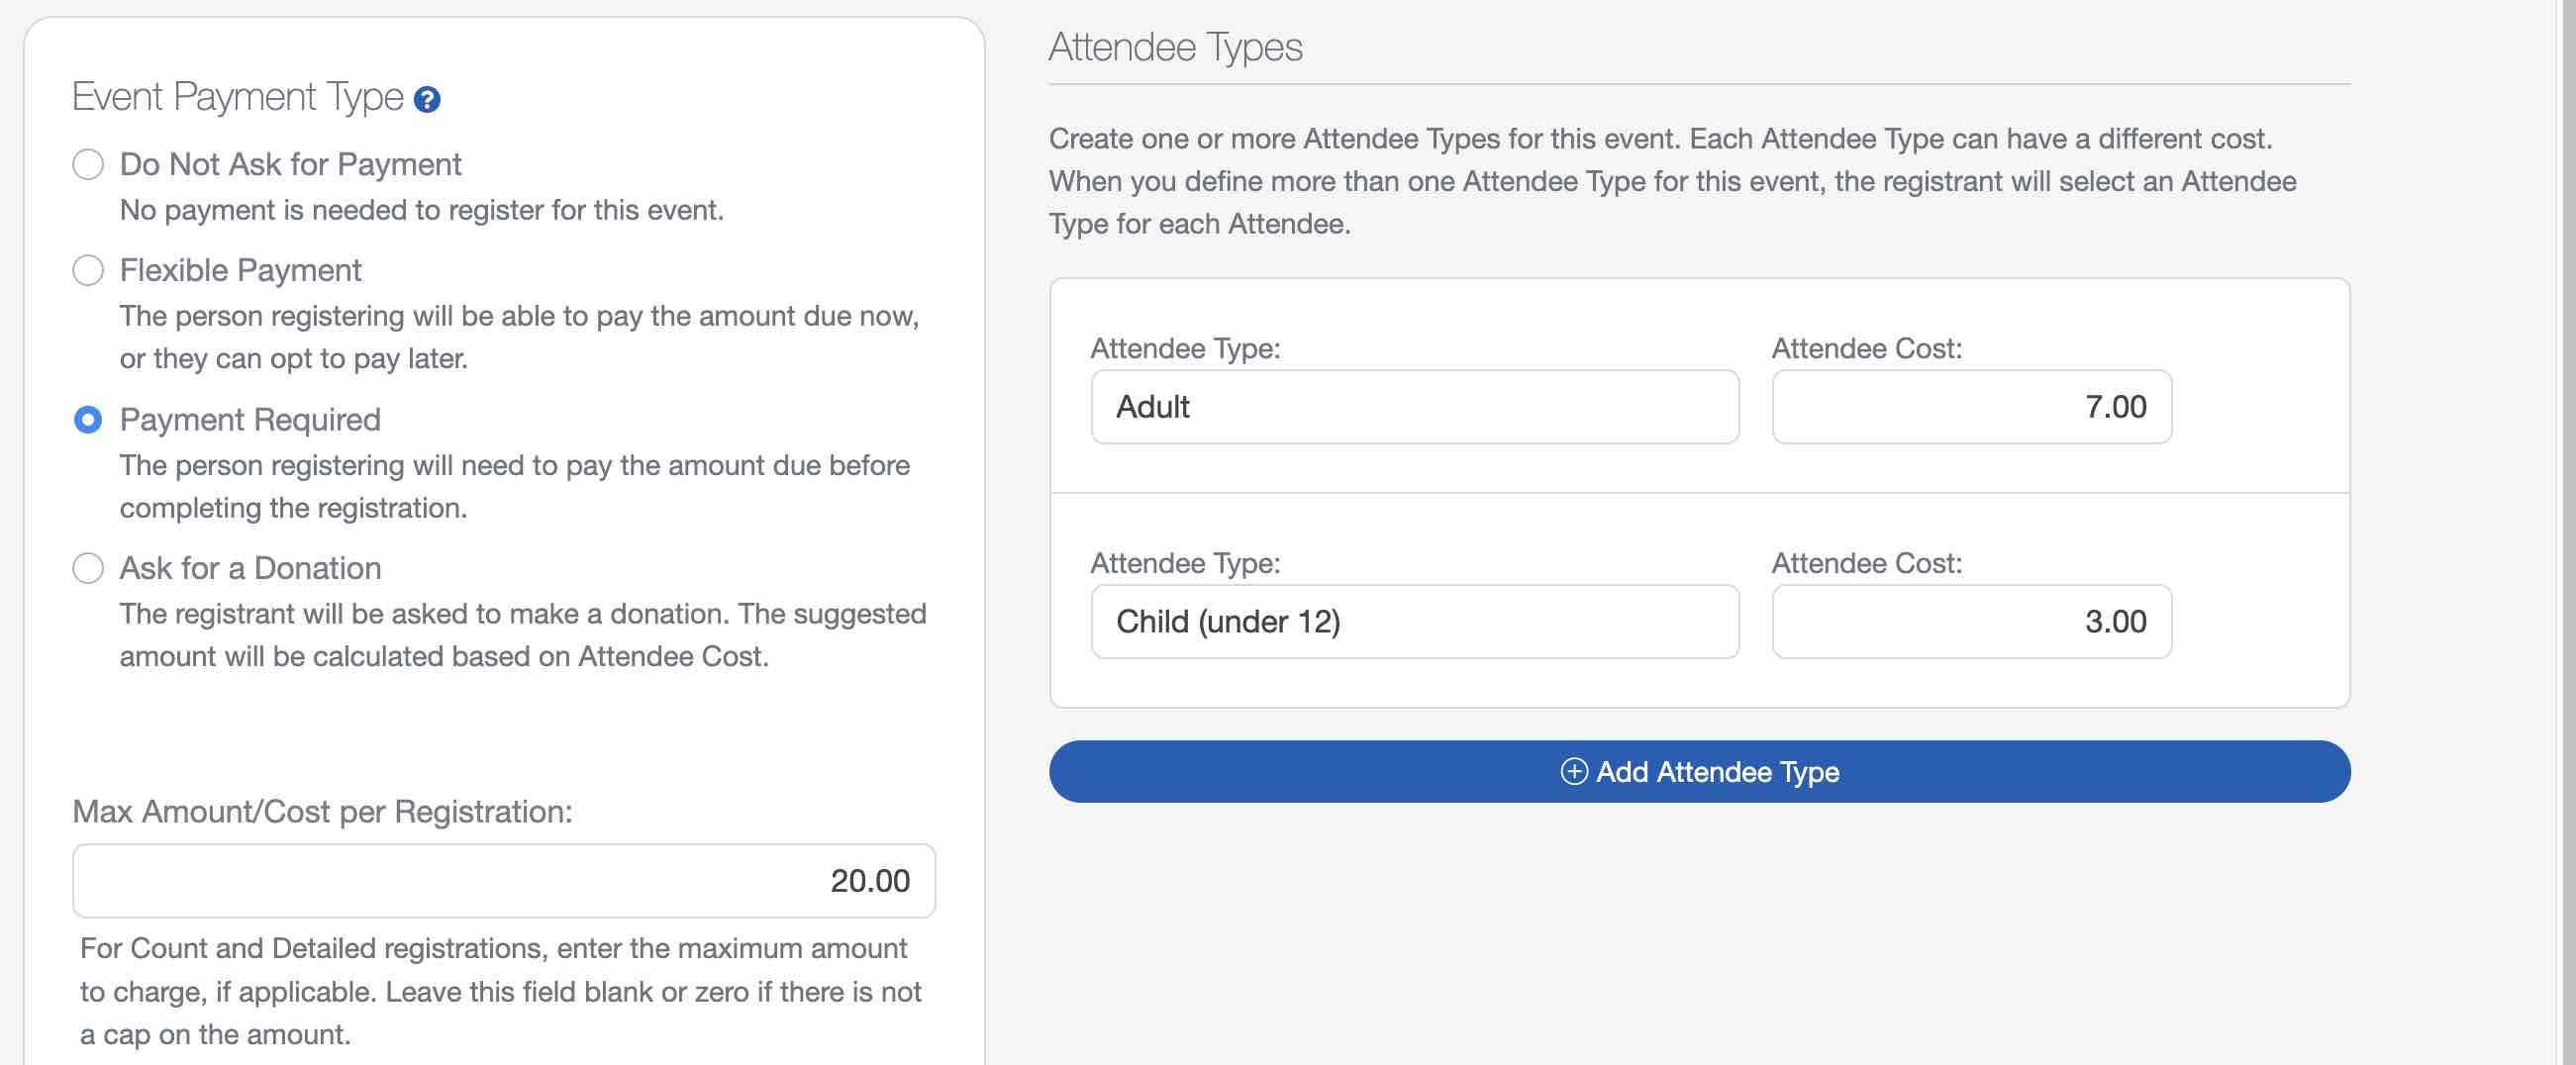 Attendee Types and Cost for church events in your church calendar in ChurchTrac